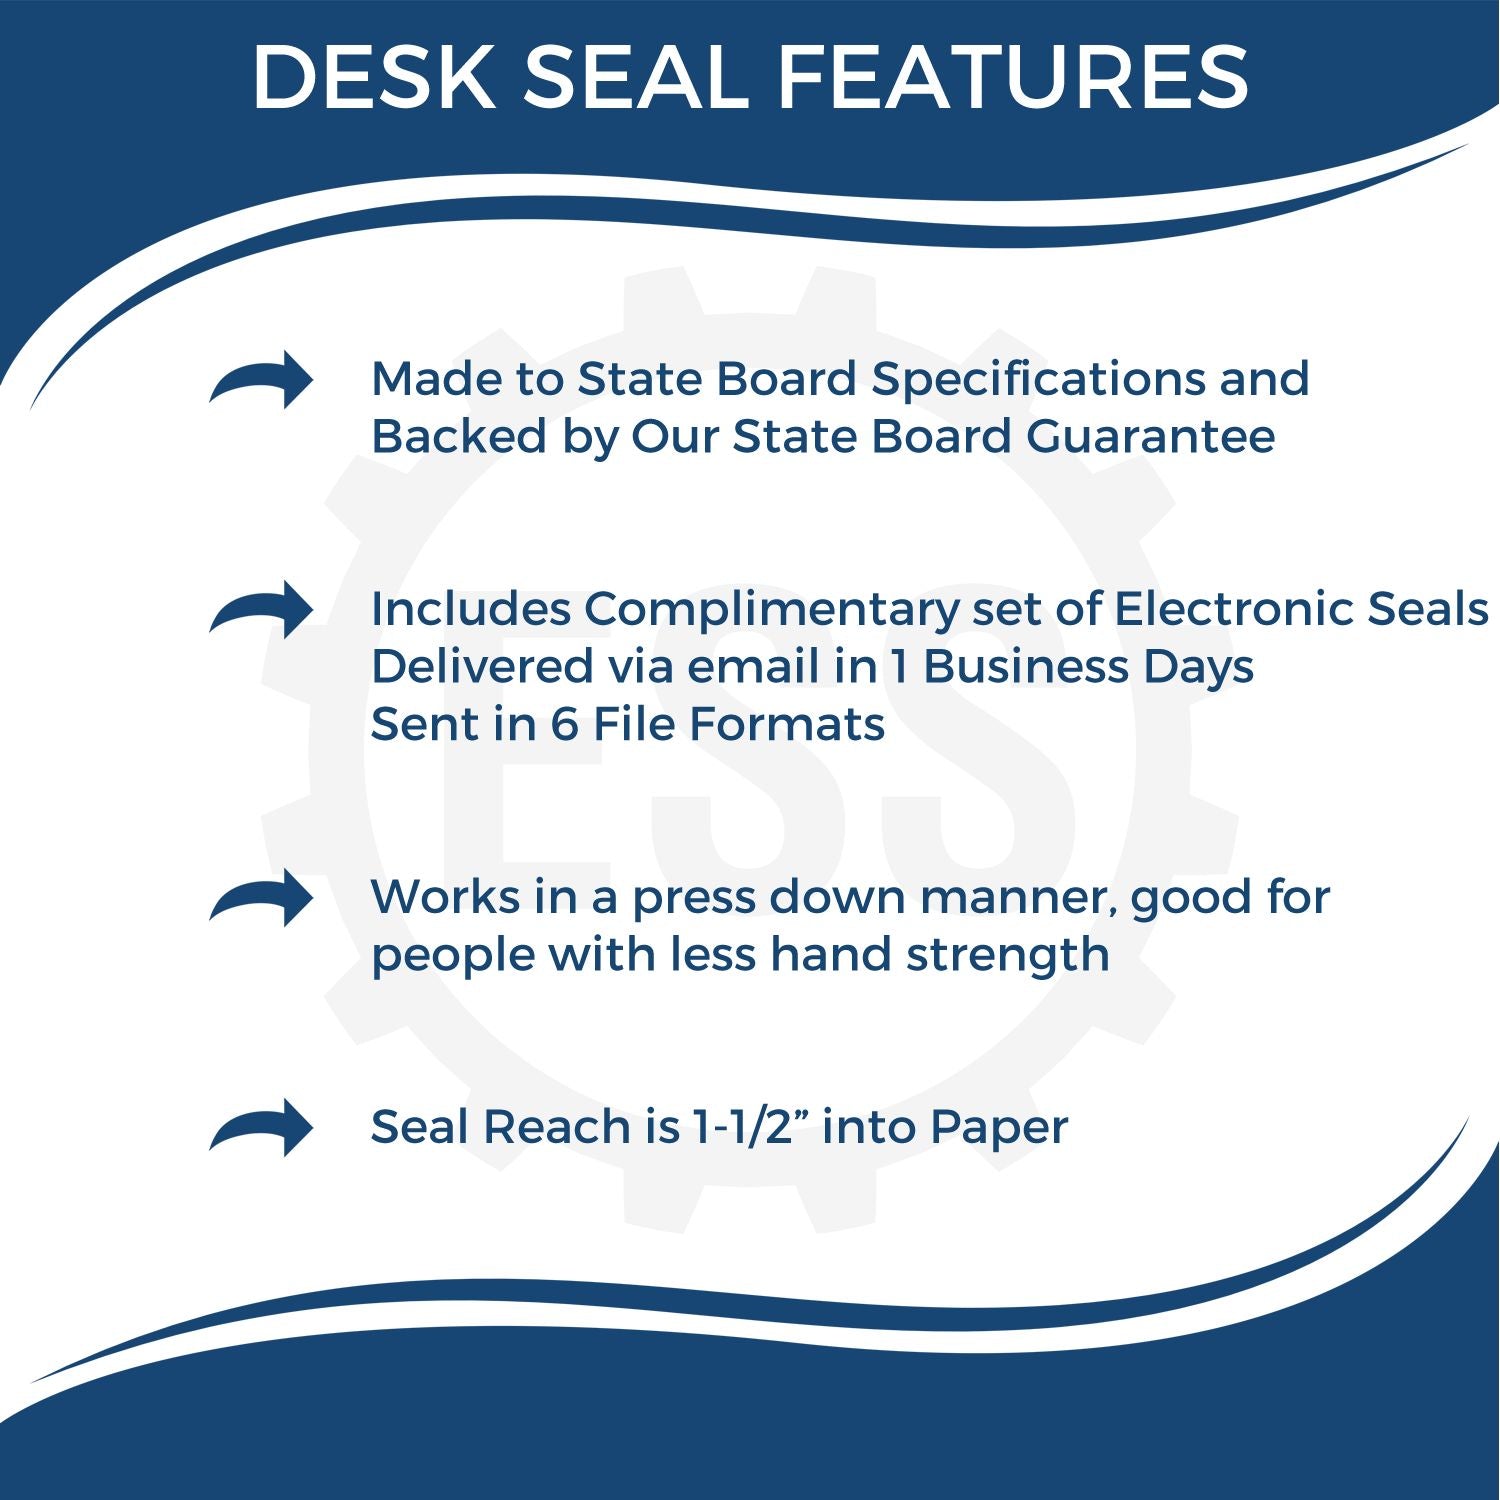 A picture of an infographic highlighting the selling points for the Wisconsin Engineer Desk Seal